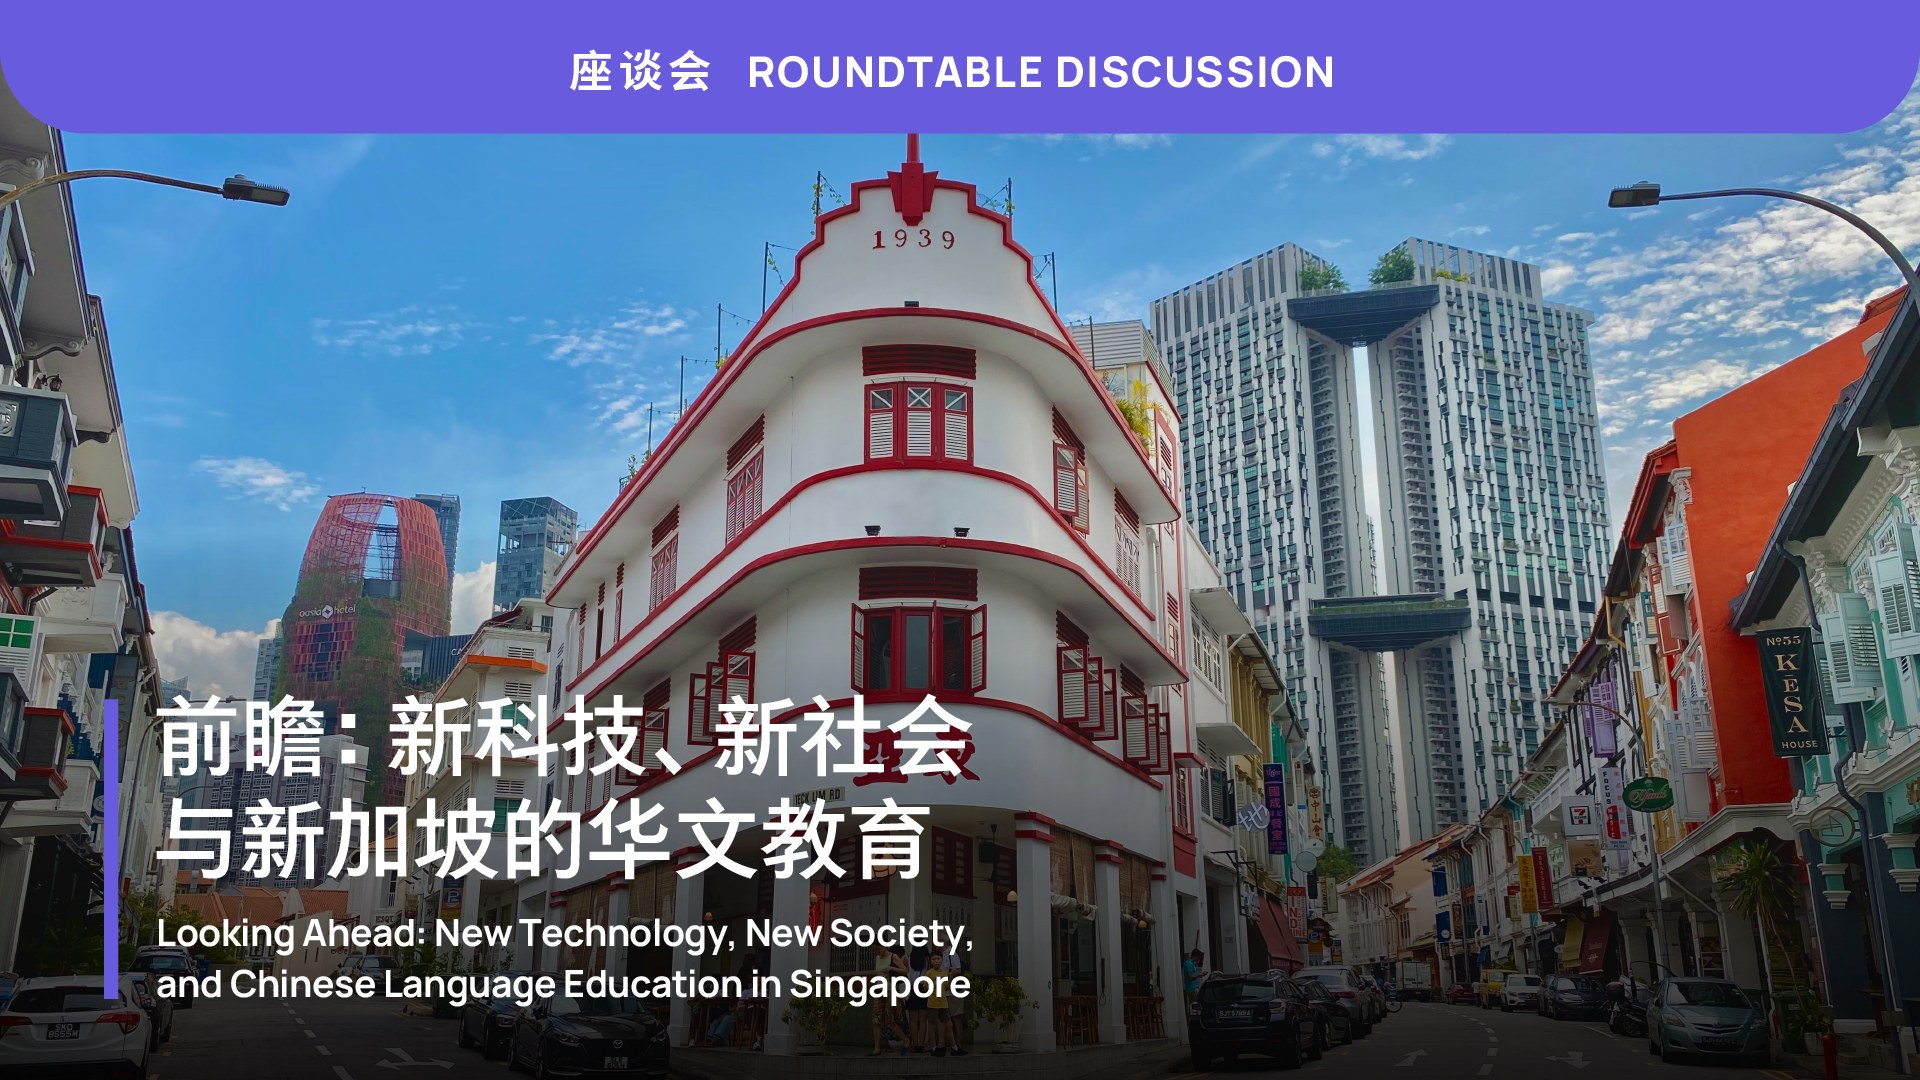 looking-ahead-new-technology-new-society-and-chinese-language-education-in-singapore-2